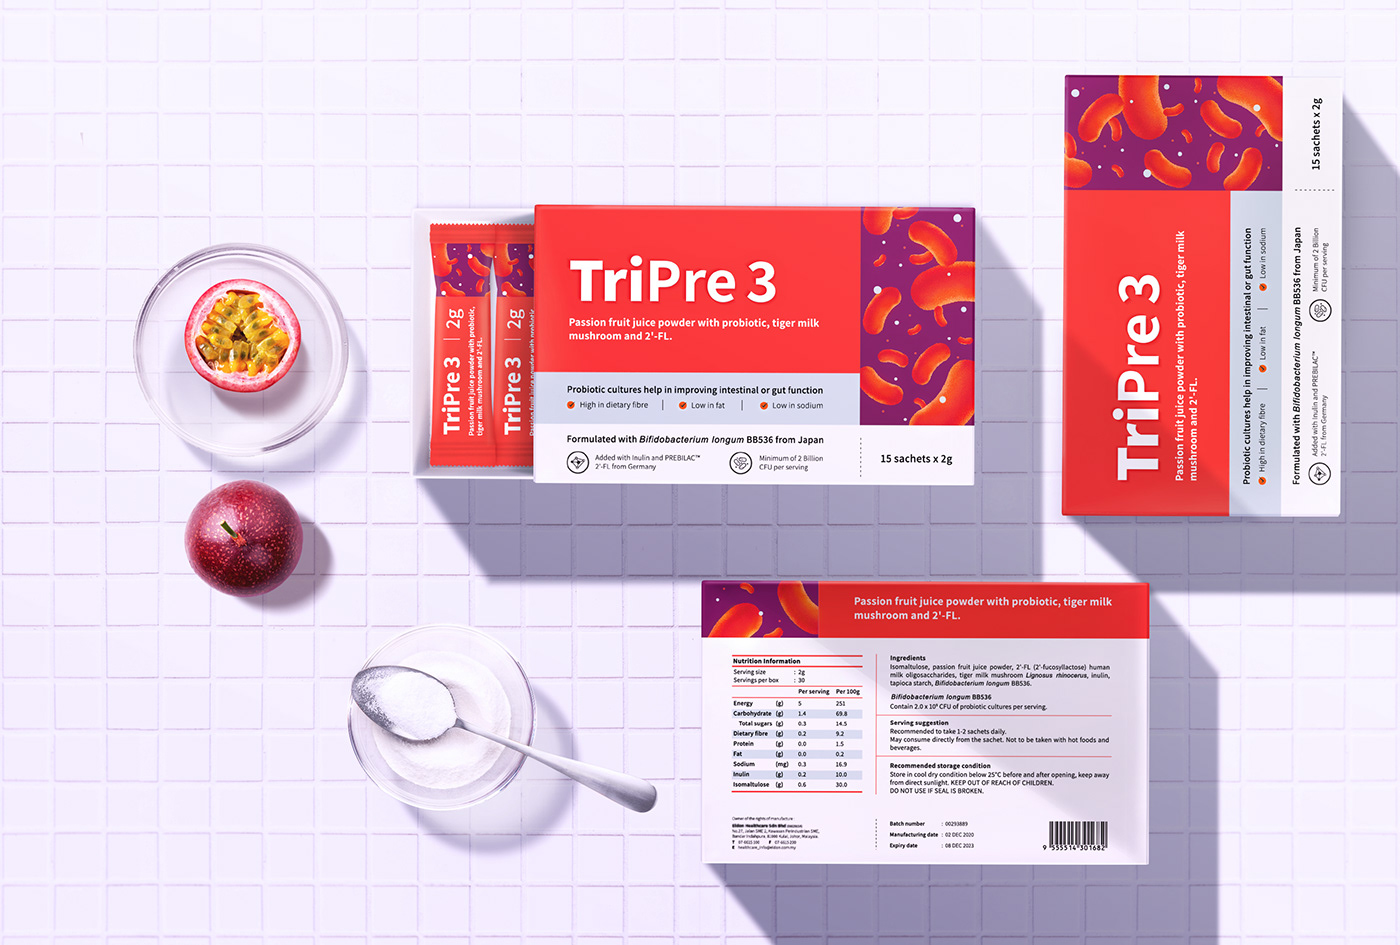 contemporary design Health supplement malaysia Packaging probiotic kuala lumpur